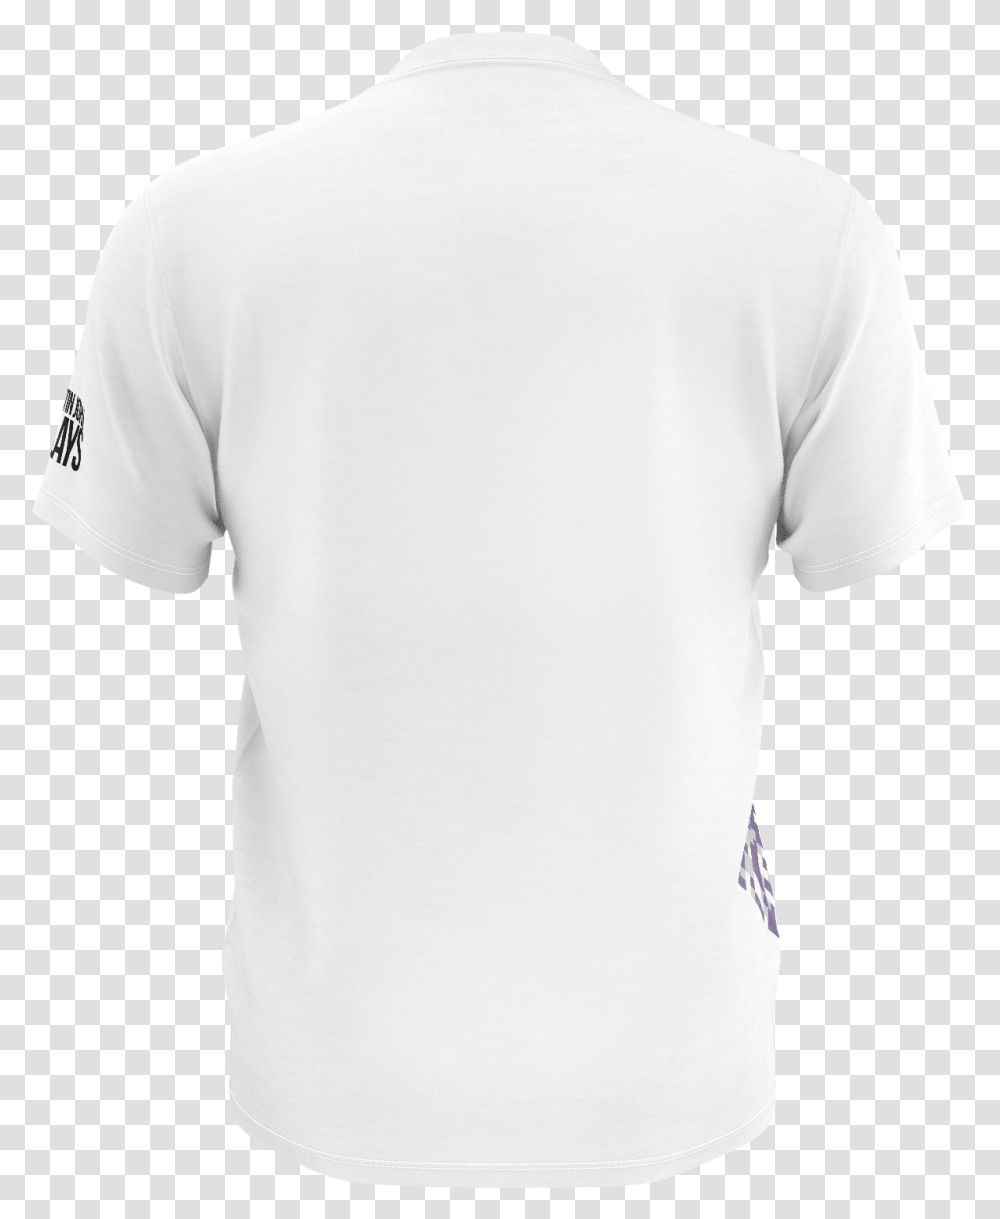 Juko Rugby Evolution Wall Sticker Decal Medium 90cm White Polo Shirt Back View, Apparel, T-Shirt, Person Transparent Png